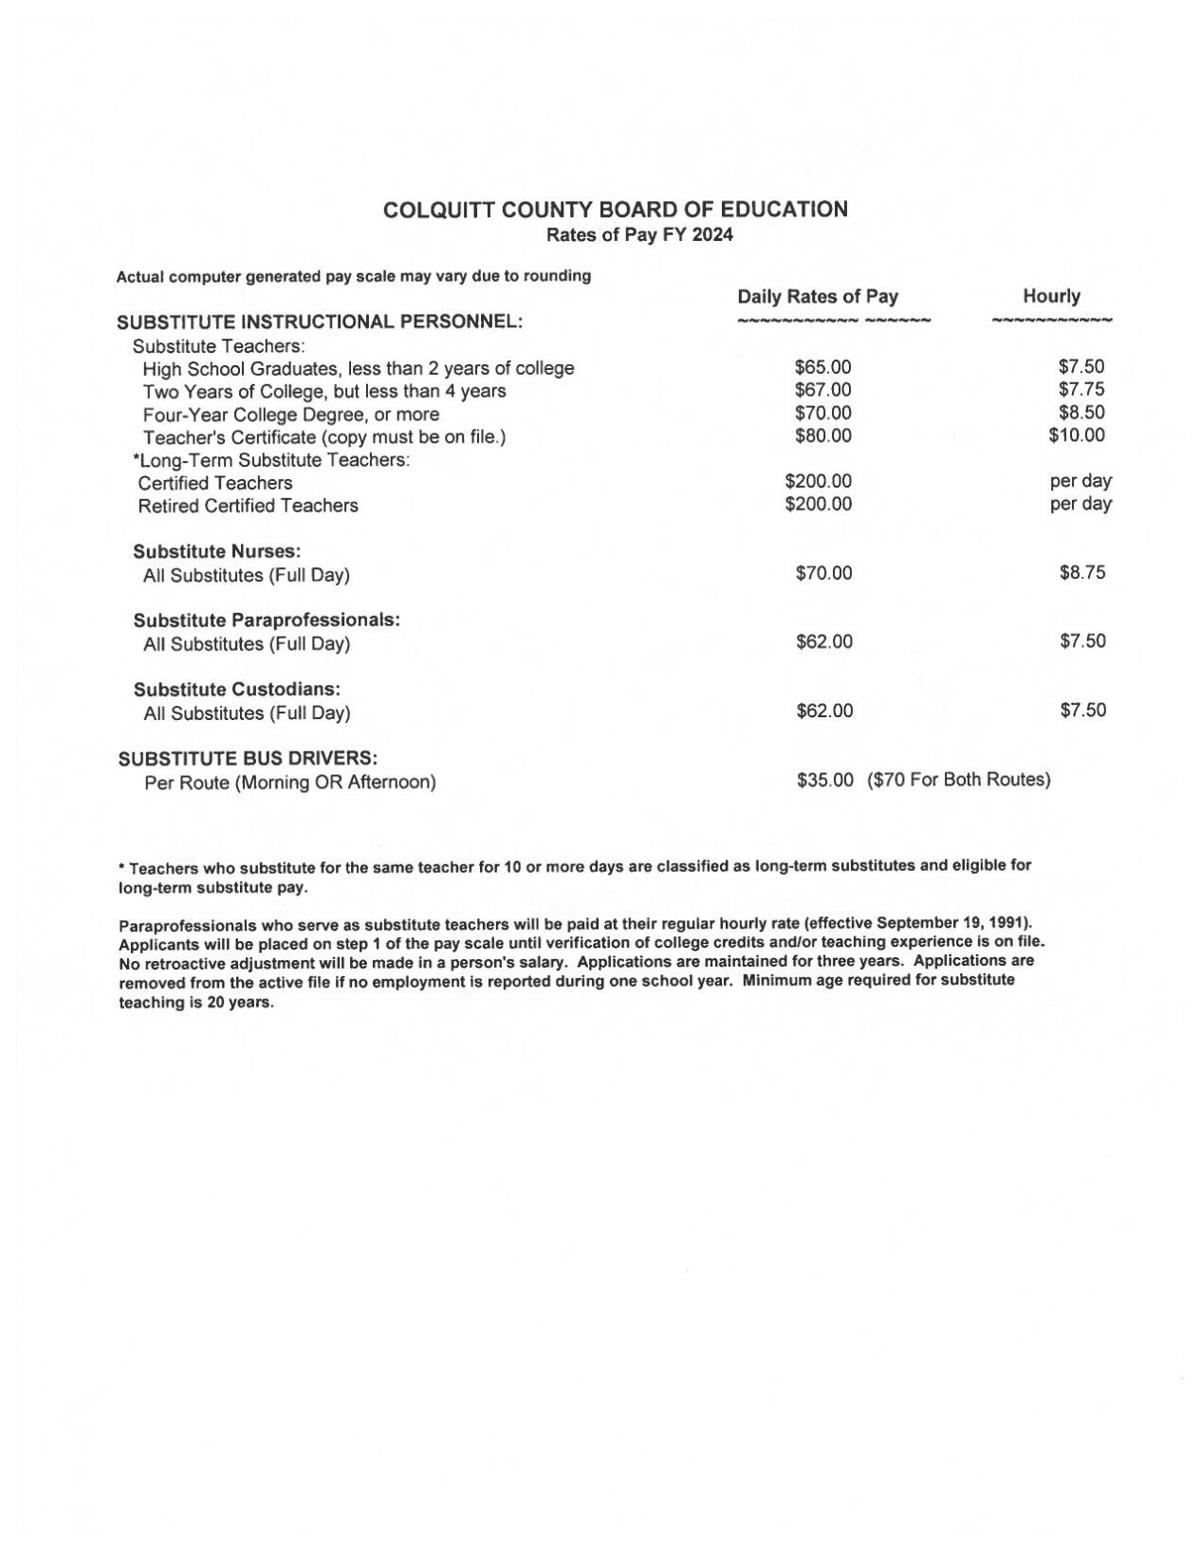 CCSD FY 2024 Substitute Pay Scales